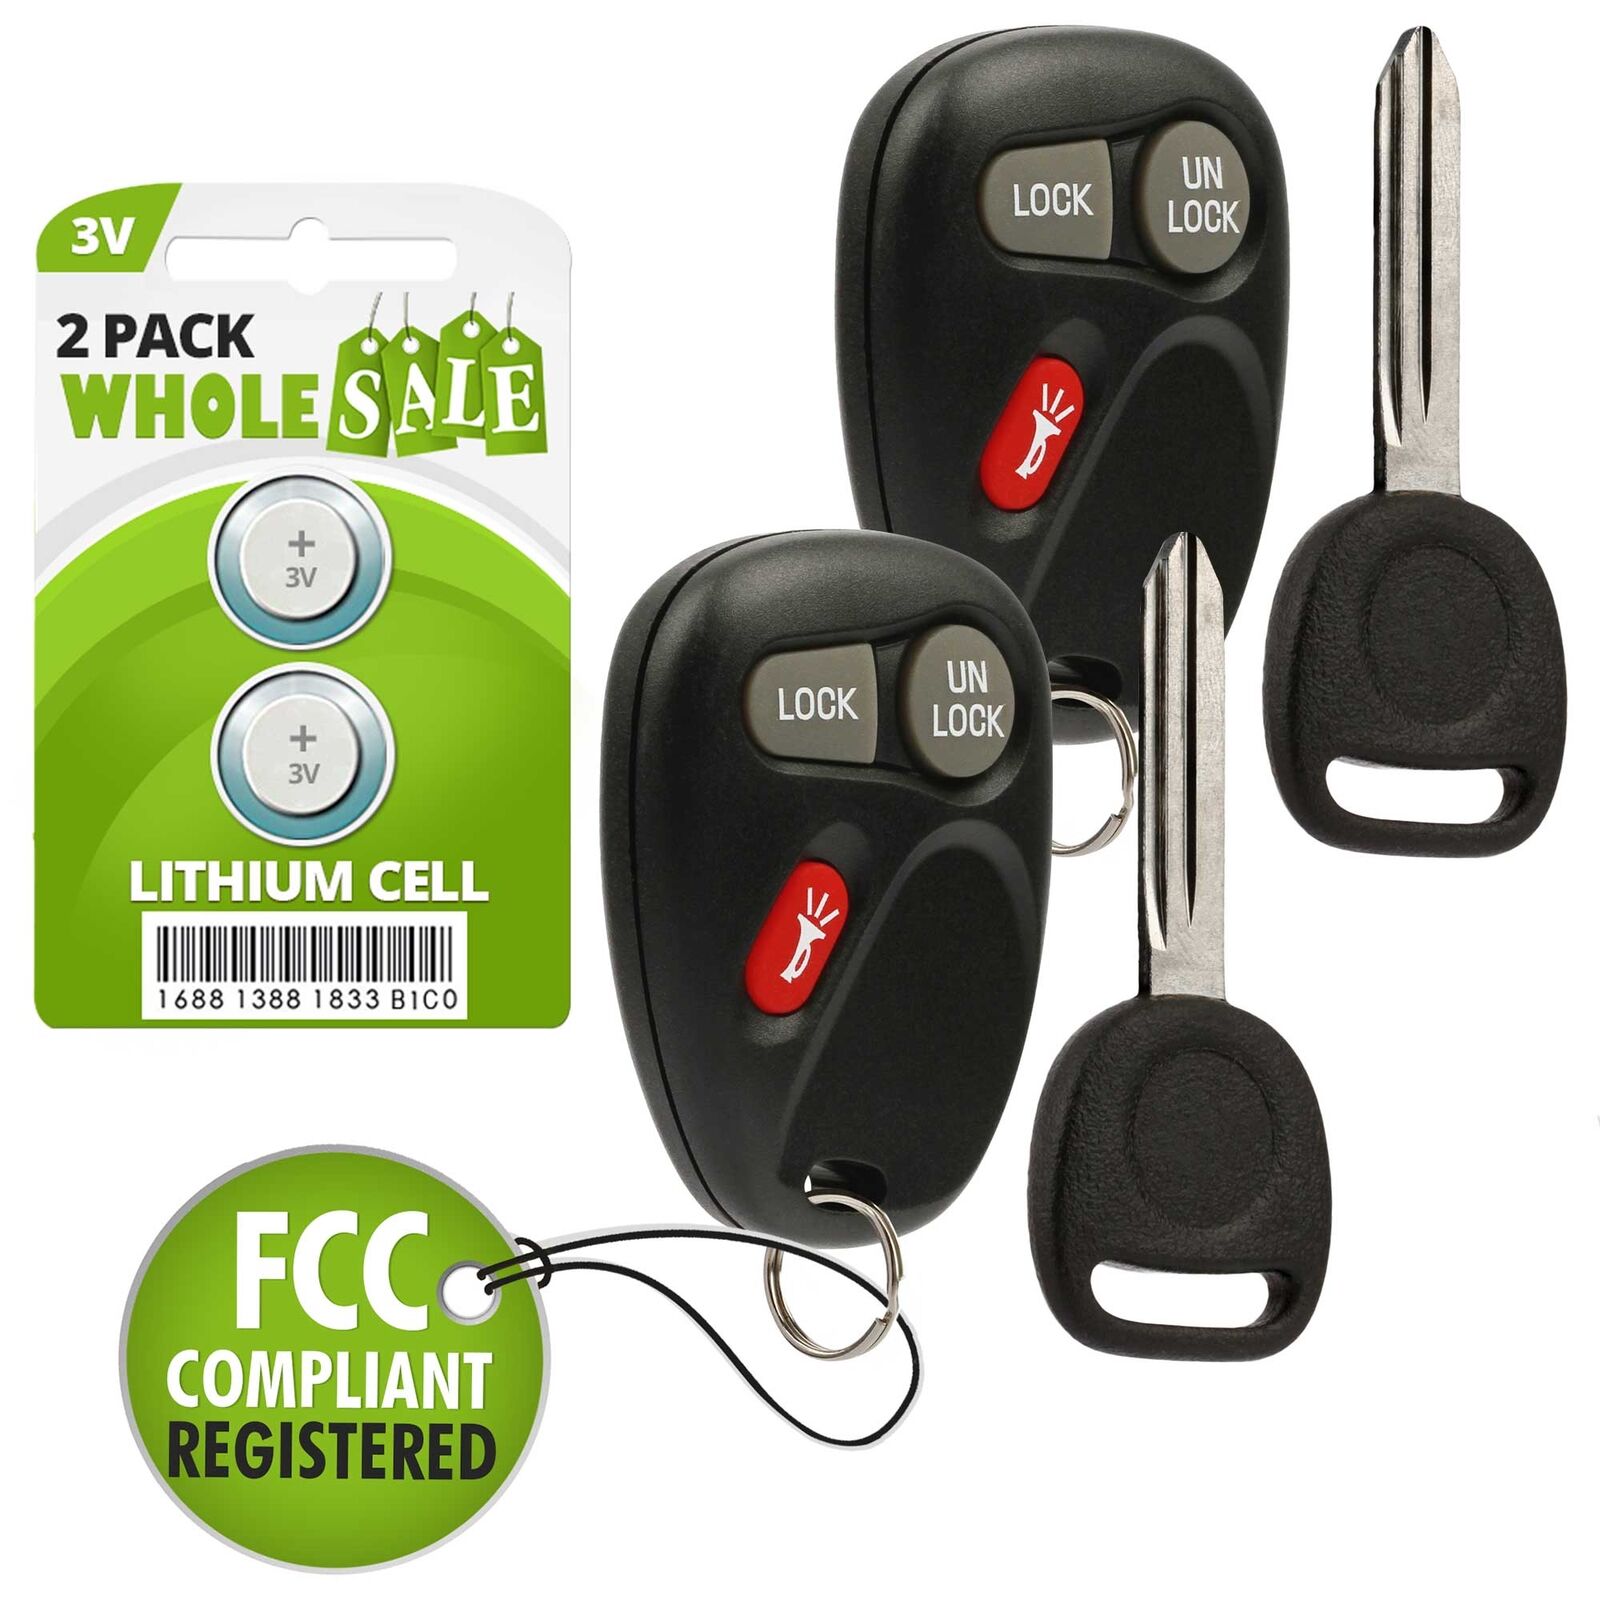 2 Replacement For 2001 2002 Chevrolet Suburban Key + Fob Remote